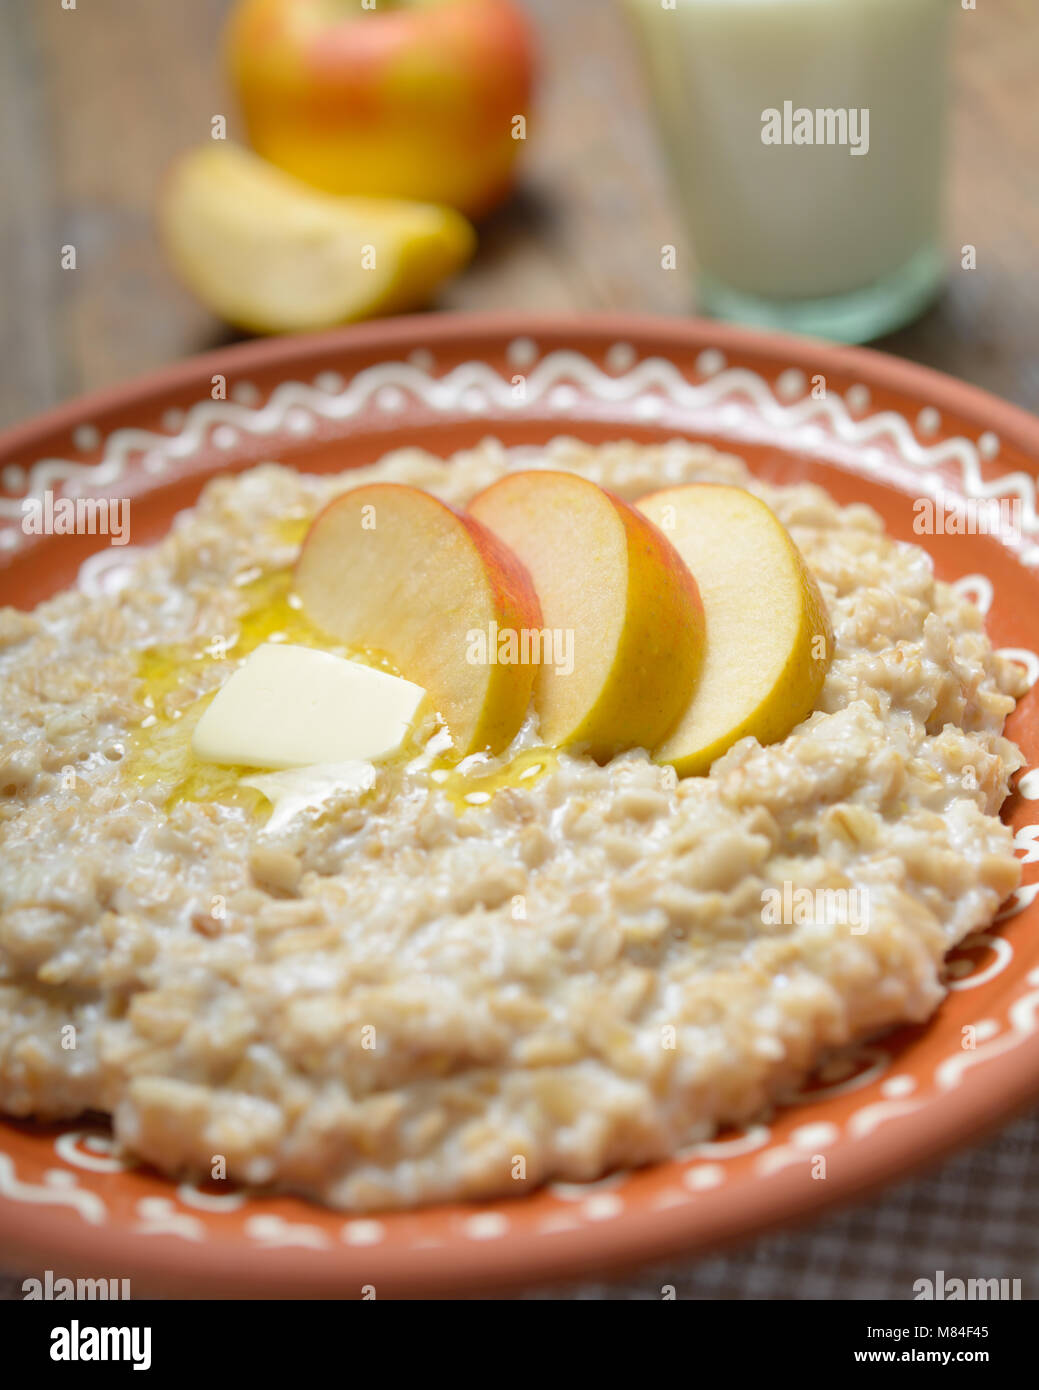 Oatmeal porridge with butter and apples Stock Photo